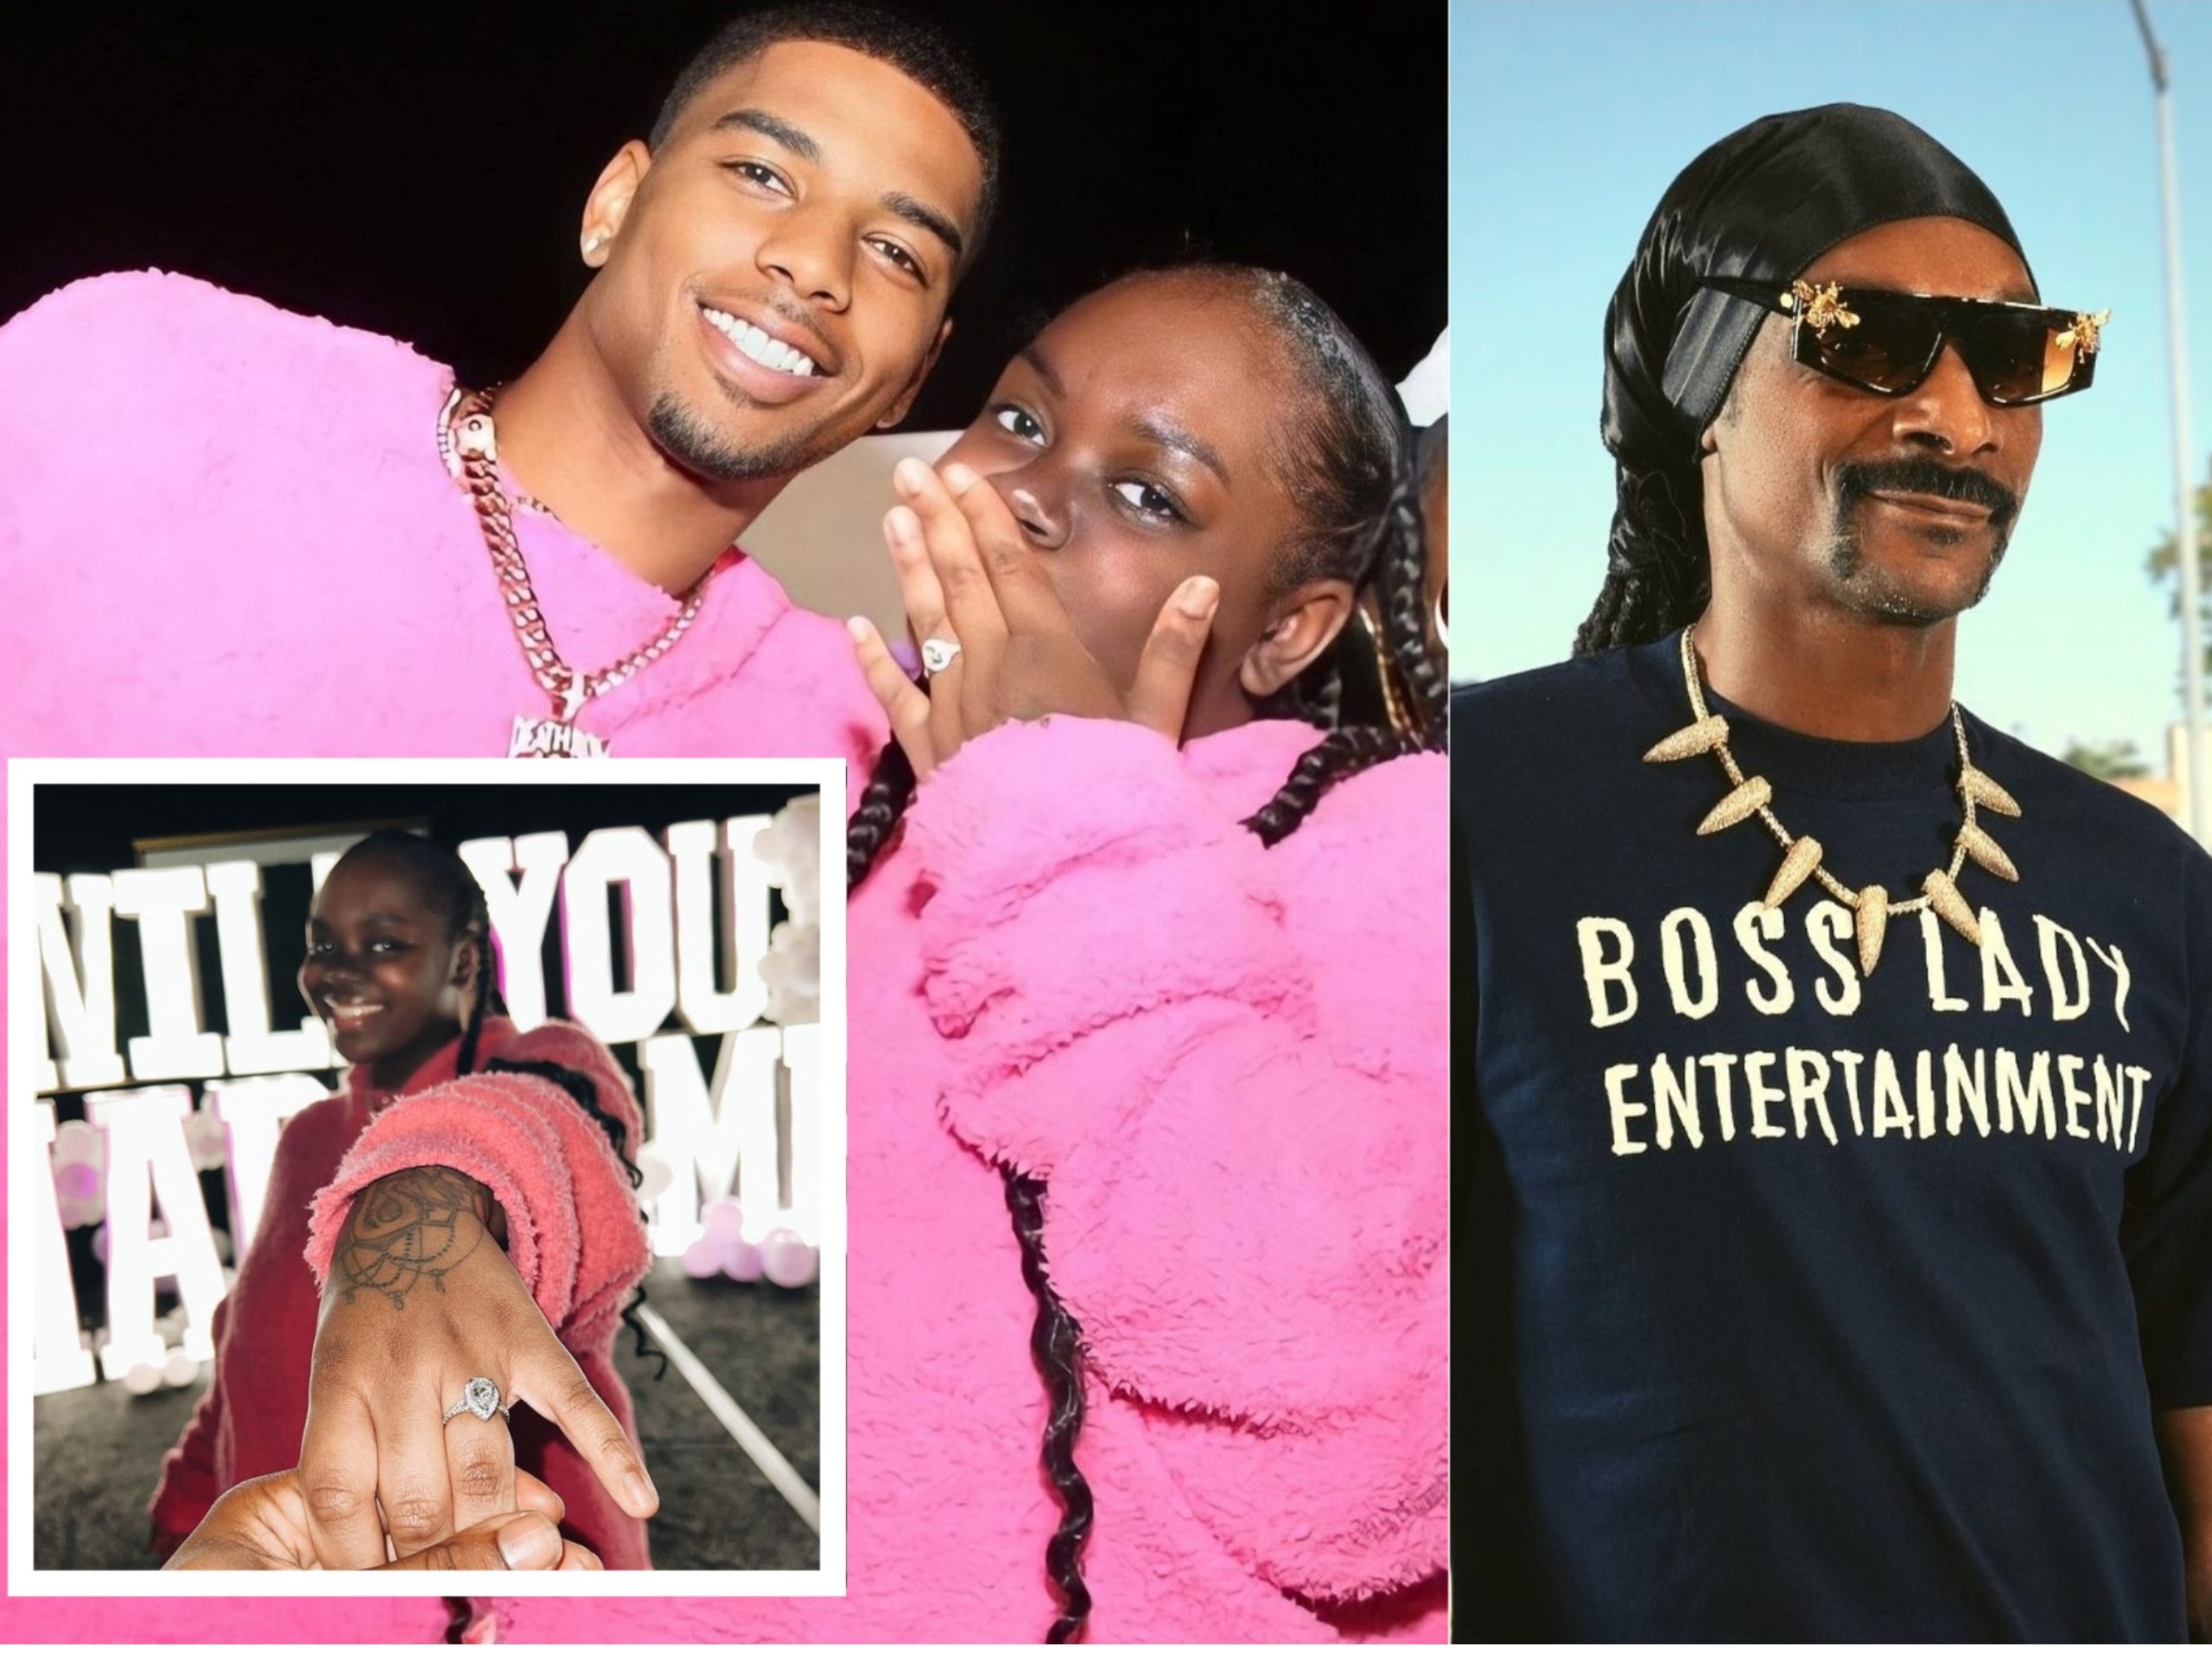 Cori Broadus, Singer and Daughter of Snoop Dogg, Is Engaged!